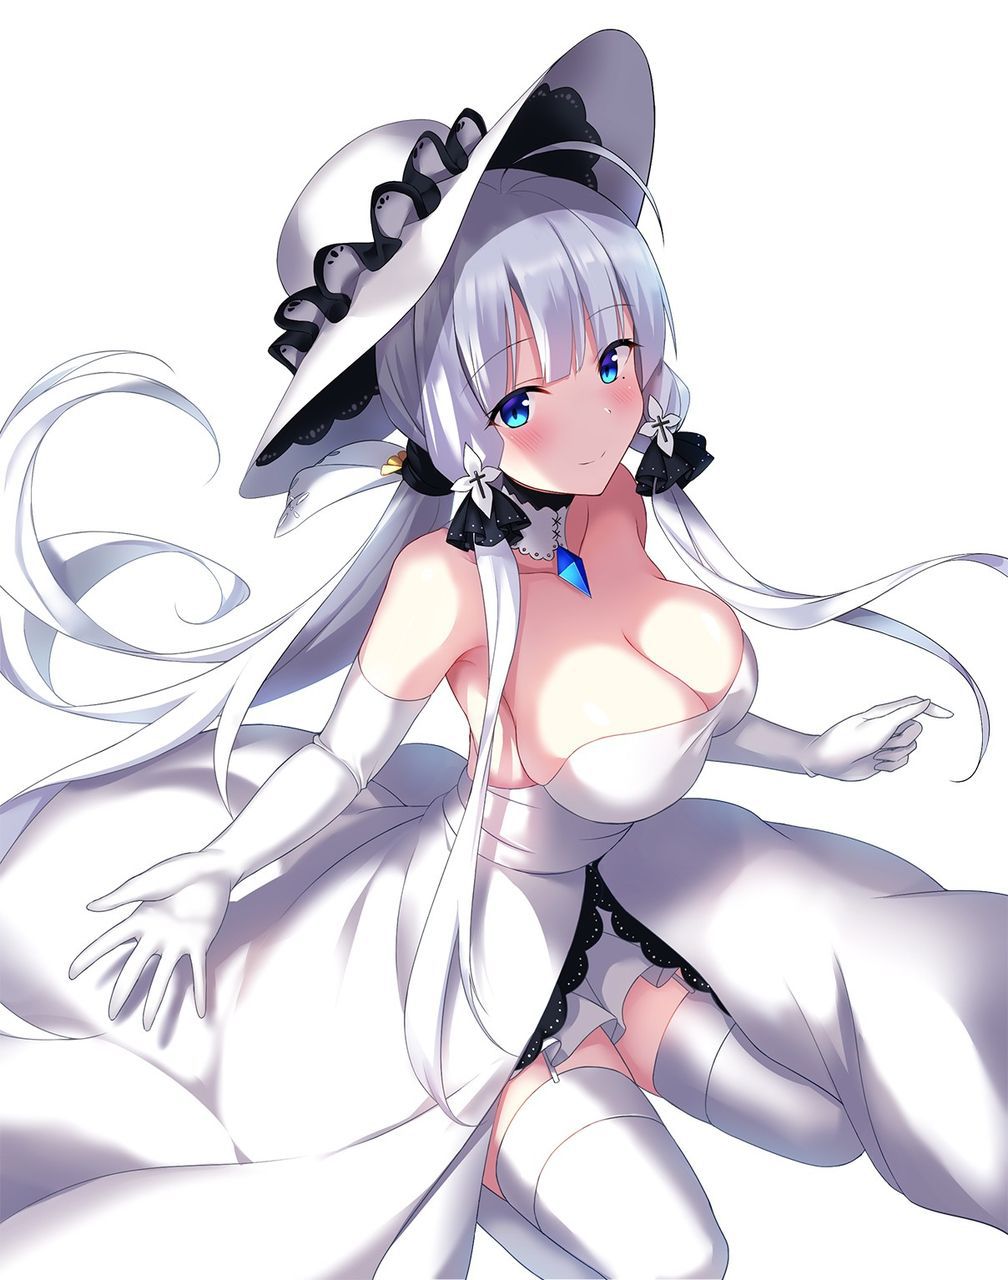 I can see the lewd charm of the silver hair. 2